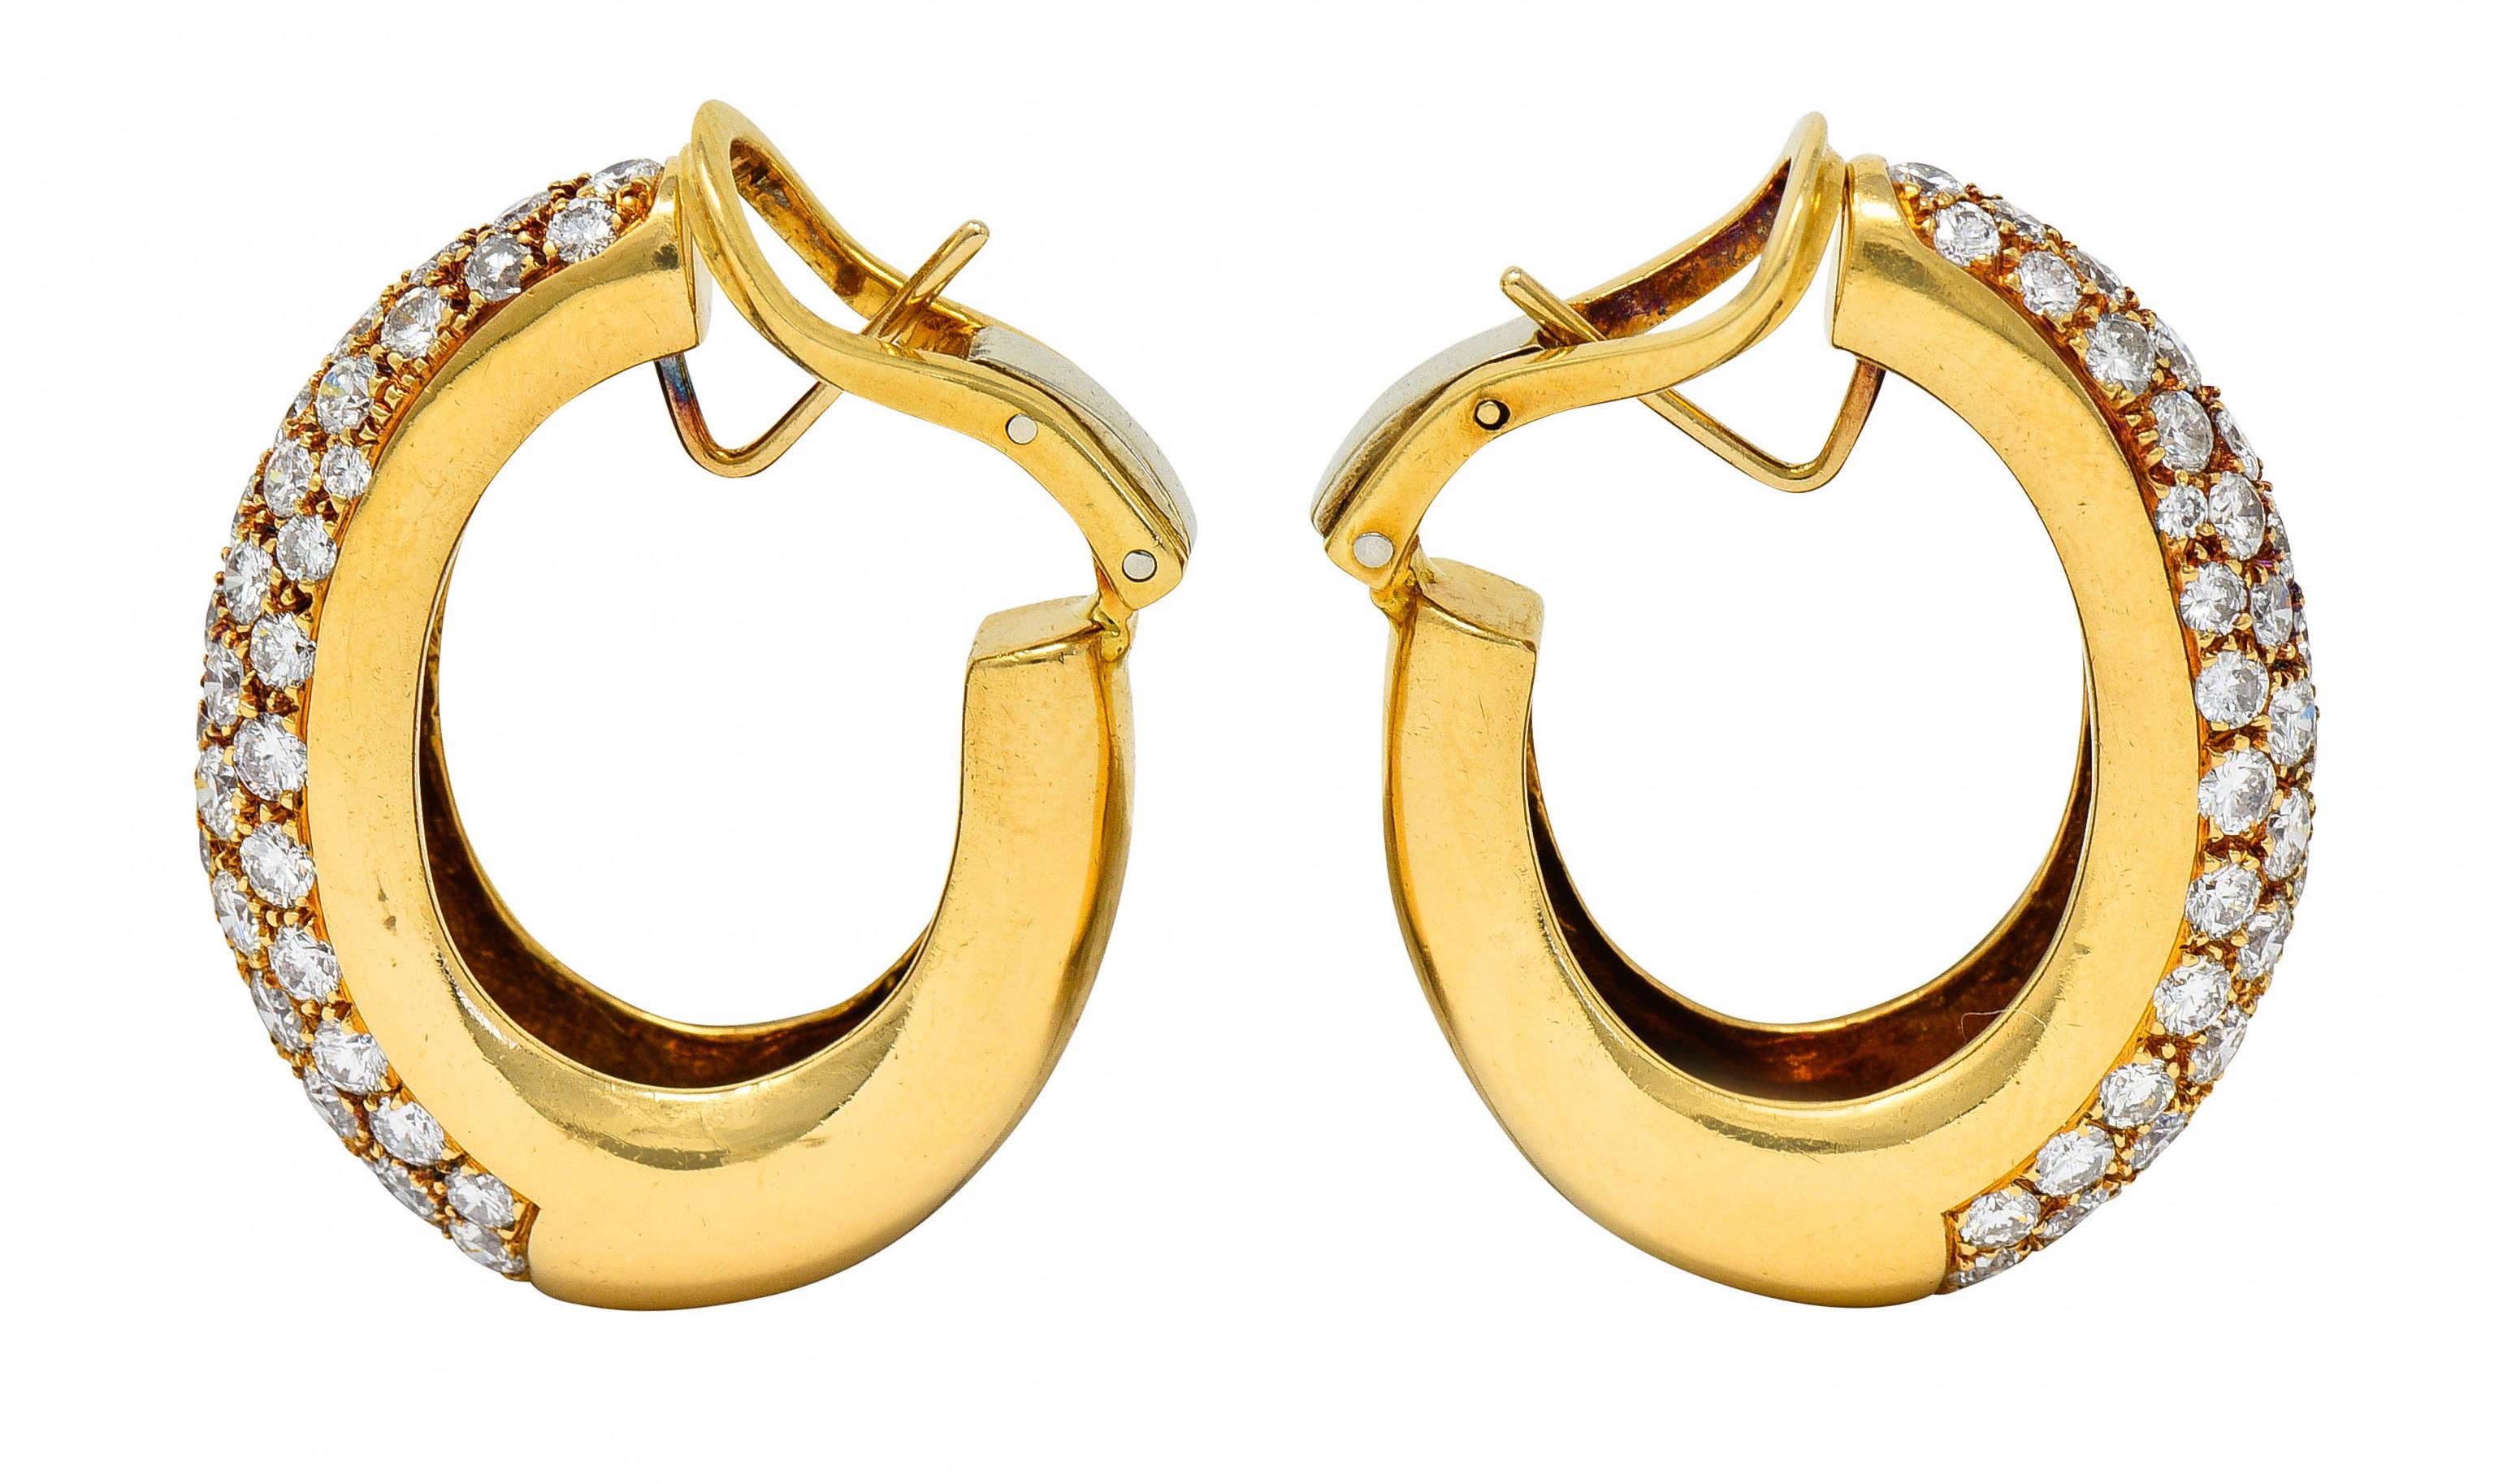 Puffed hoop earrings are pavè set to front with round brilliant cut diamonds

Weighing in total approximately 7.45 carats with G to J color with SI clarity

Completed by posts and hinged omega backs

Tested as 18 karat gold

Circa: 1980s

Measures: